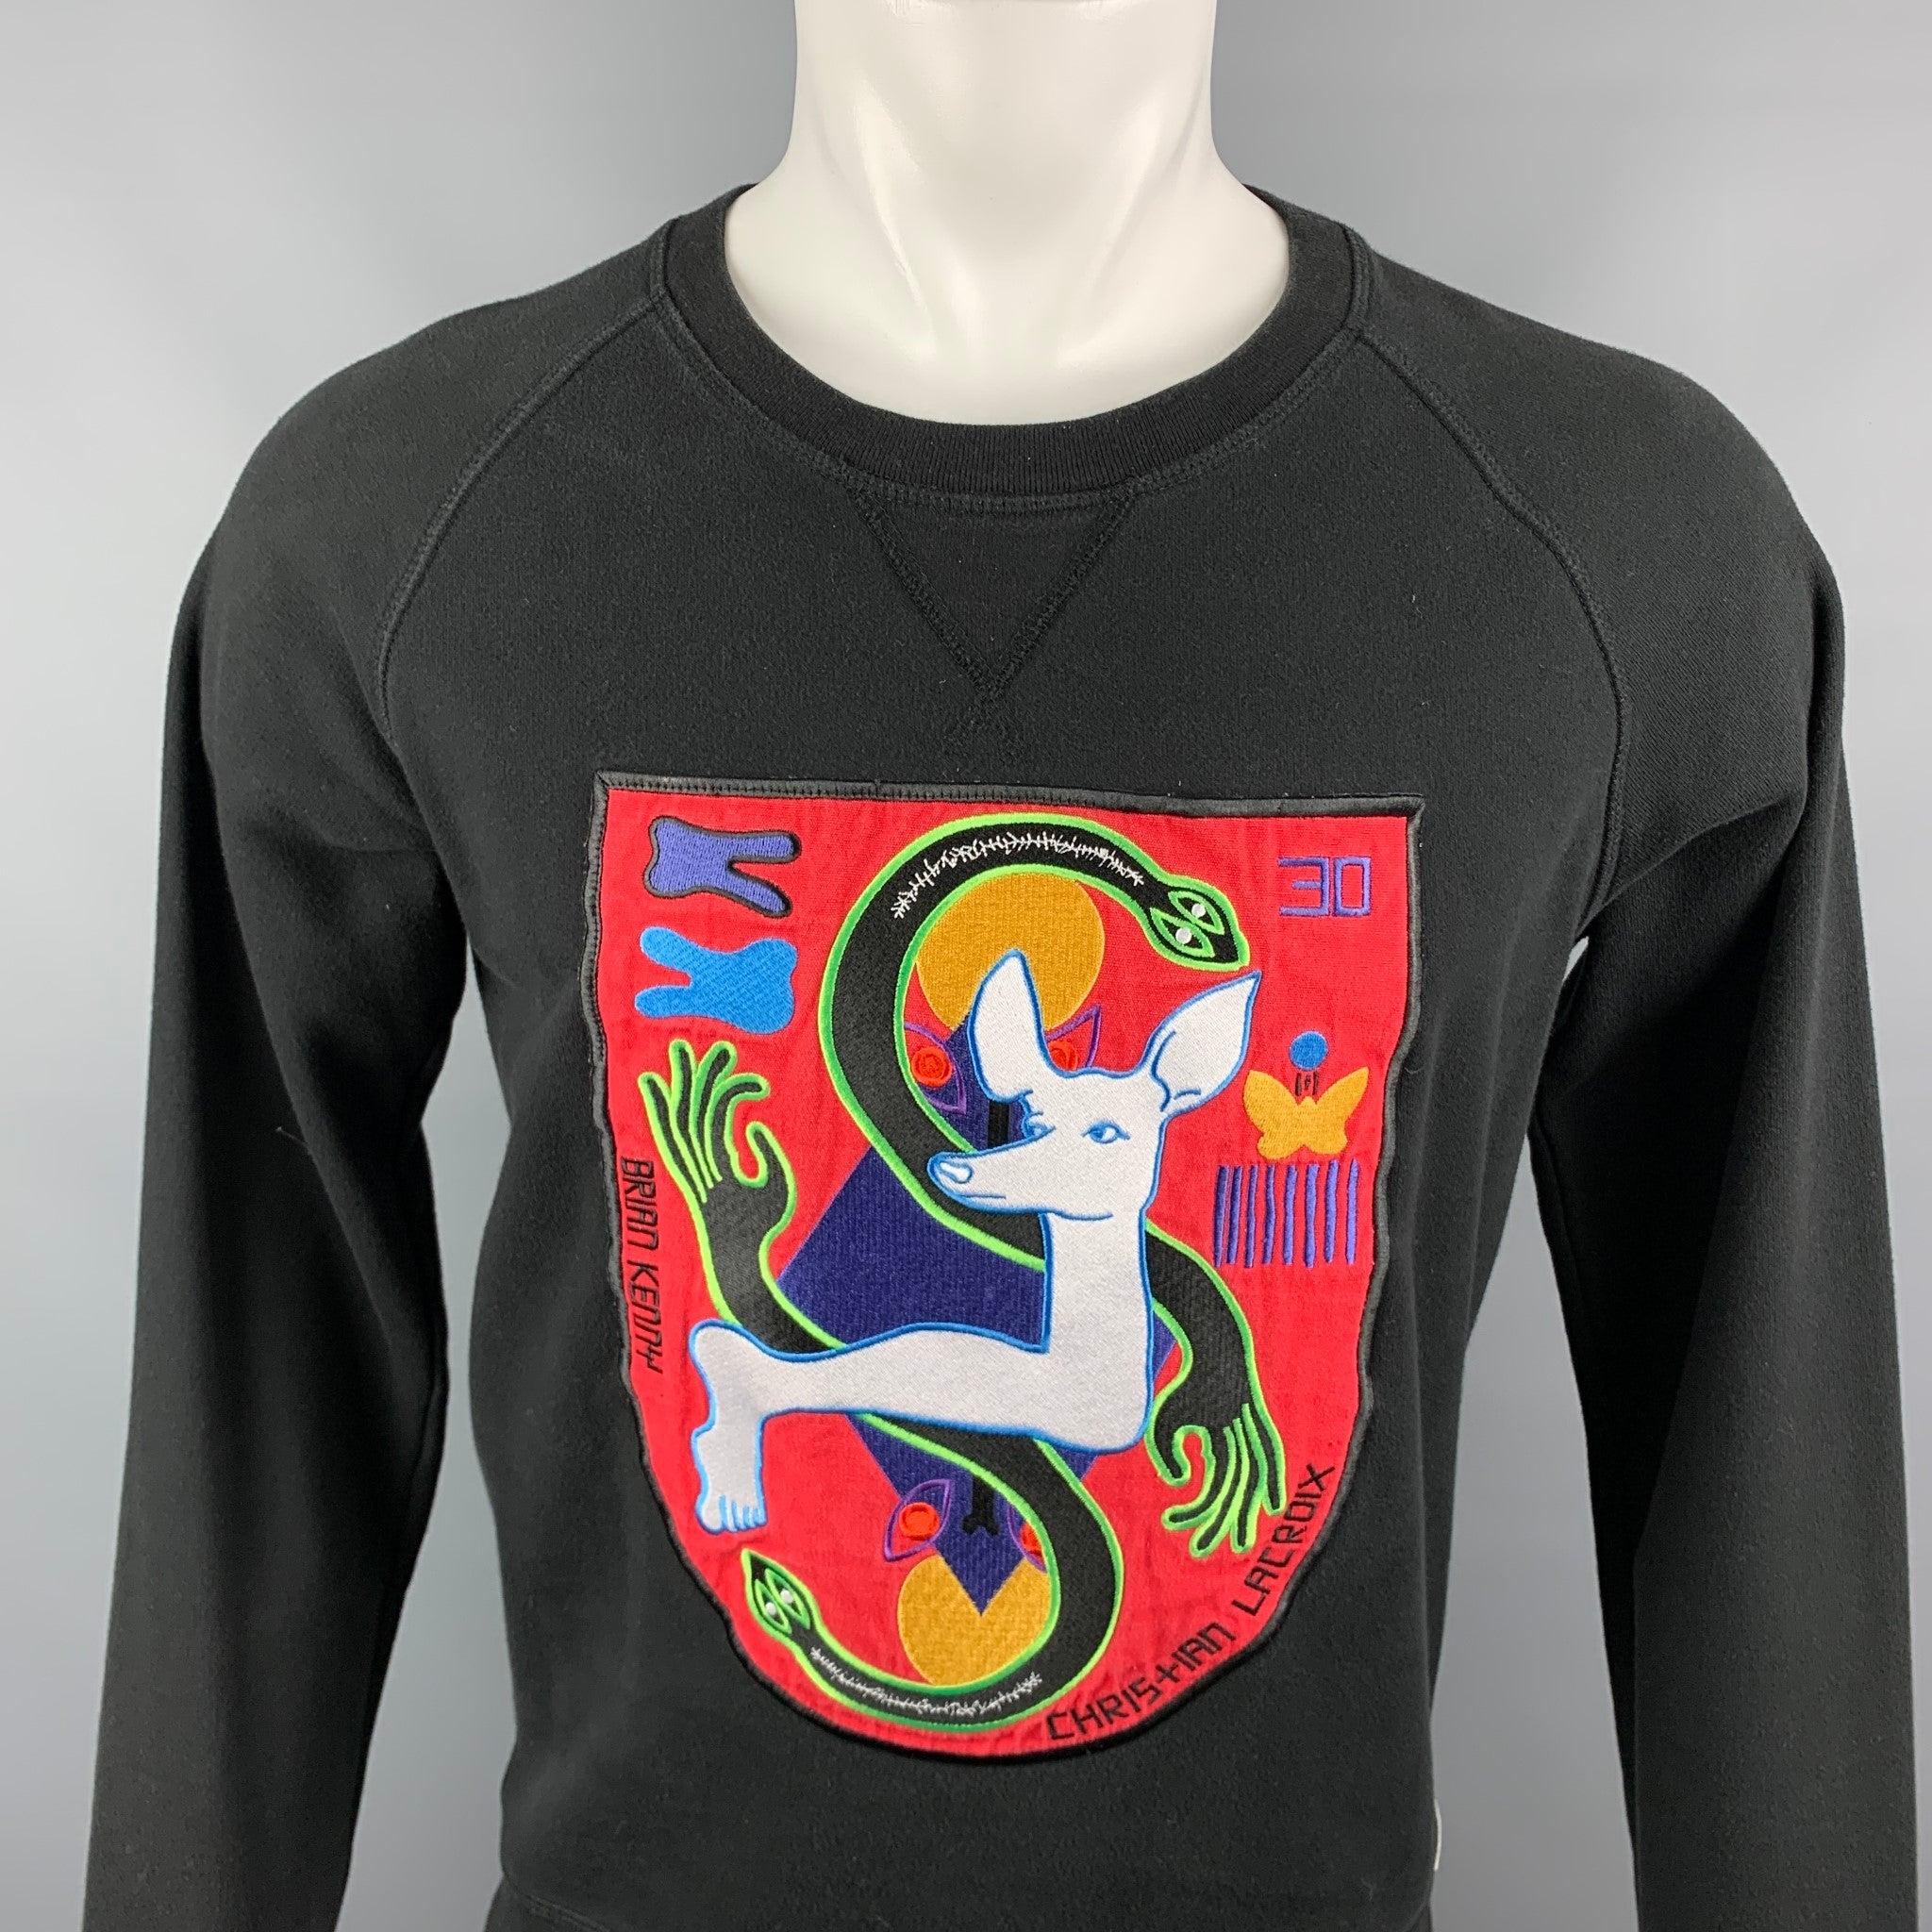 CHRISTIAN LACROIX x BRIAN KENNY Limited Edition sweatshirt comes in a black & red abstract cotton featuring a large patch detain and a crew-neck. Good Pre-Owned Condition. 

Marked:   S 

Measurements: 
 
Shoulder: 17 inches  Chest: 41 inches 